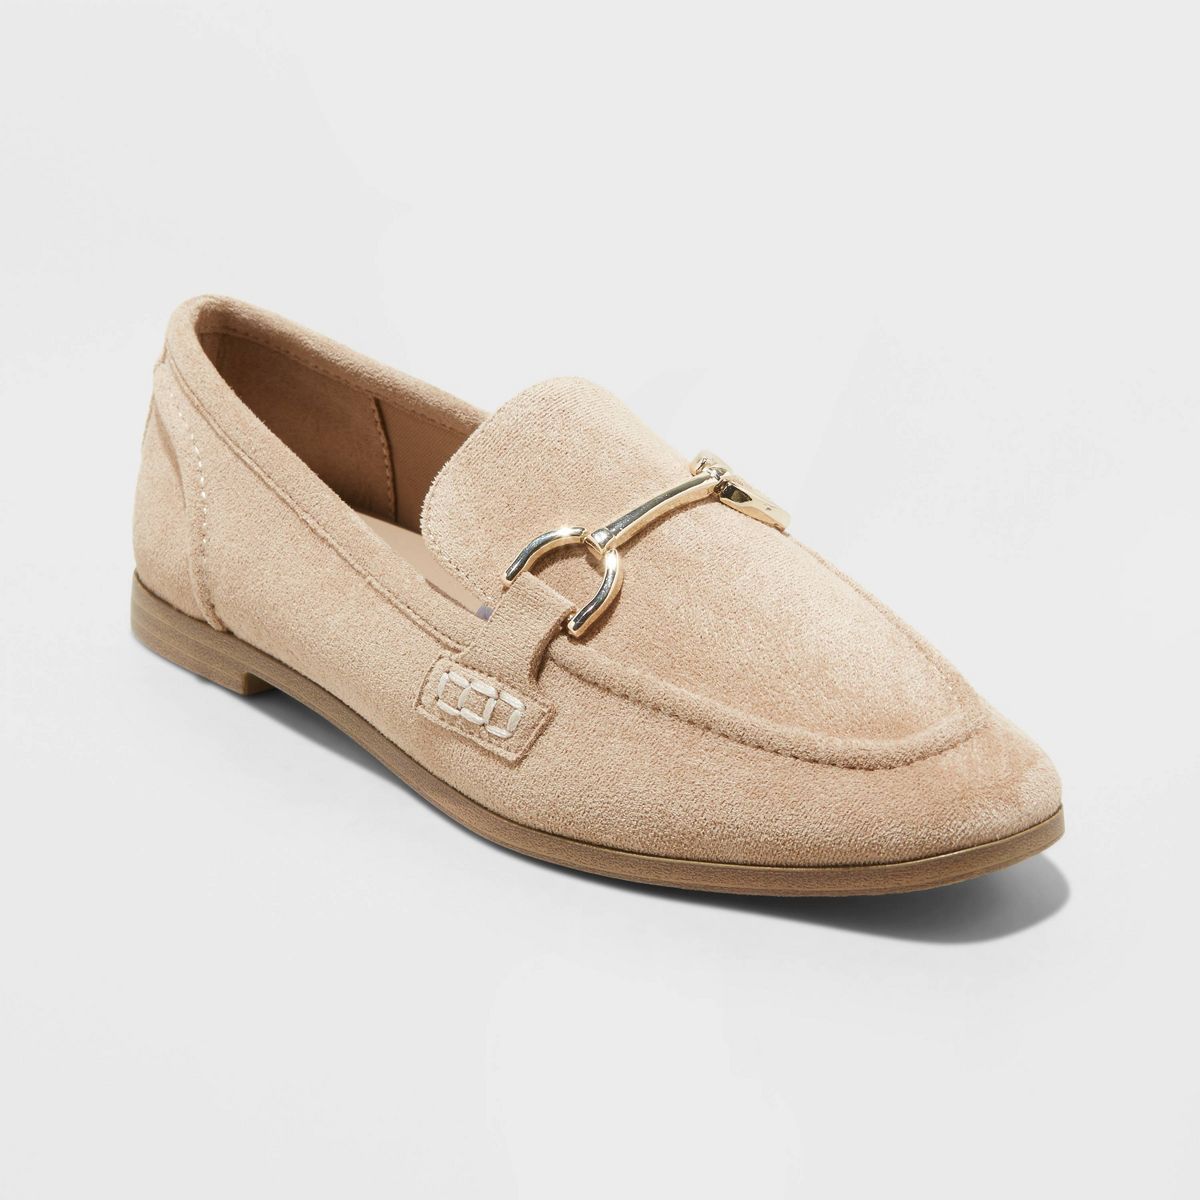 Women's Laurel Loafer Flats with Memory Foam Insole - A New Day™ Light Taupe 8.5 | Target